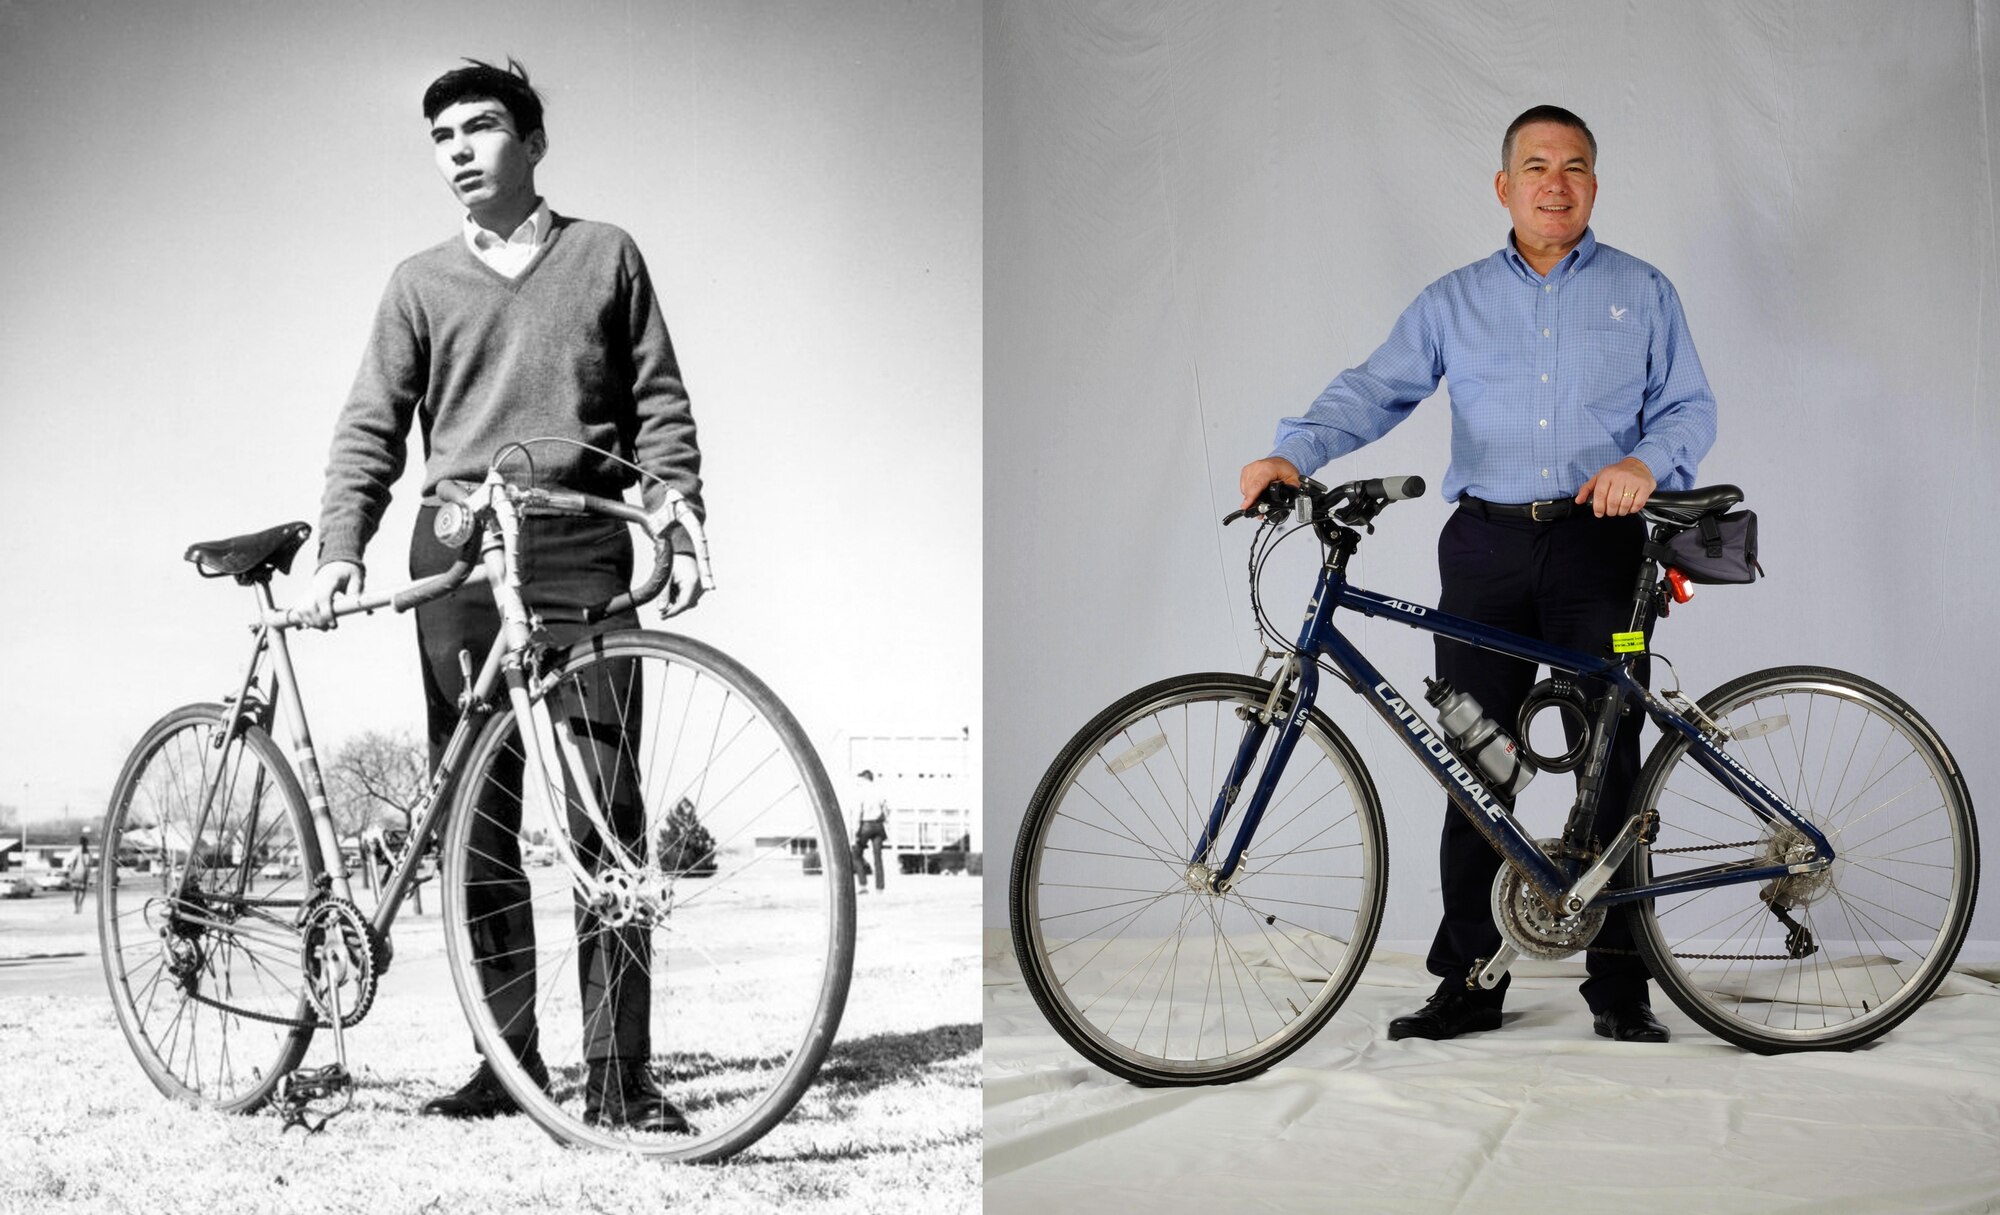 Mike Nishimuta, on the left at 17 years old with the bike he used to travel more than 3,000 miles through Europe, February 1969, in Lawton, Okla., and on the right, after celebrating the 45th anniversary of his trip, October 2013, at Aviano Air Base, Italy. Nishimuta rode along the same 50-mile path from Venice to Bassano, Italy, Oct. 19